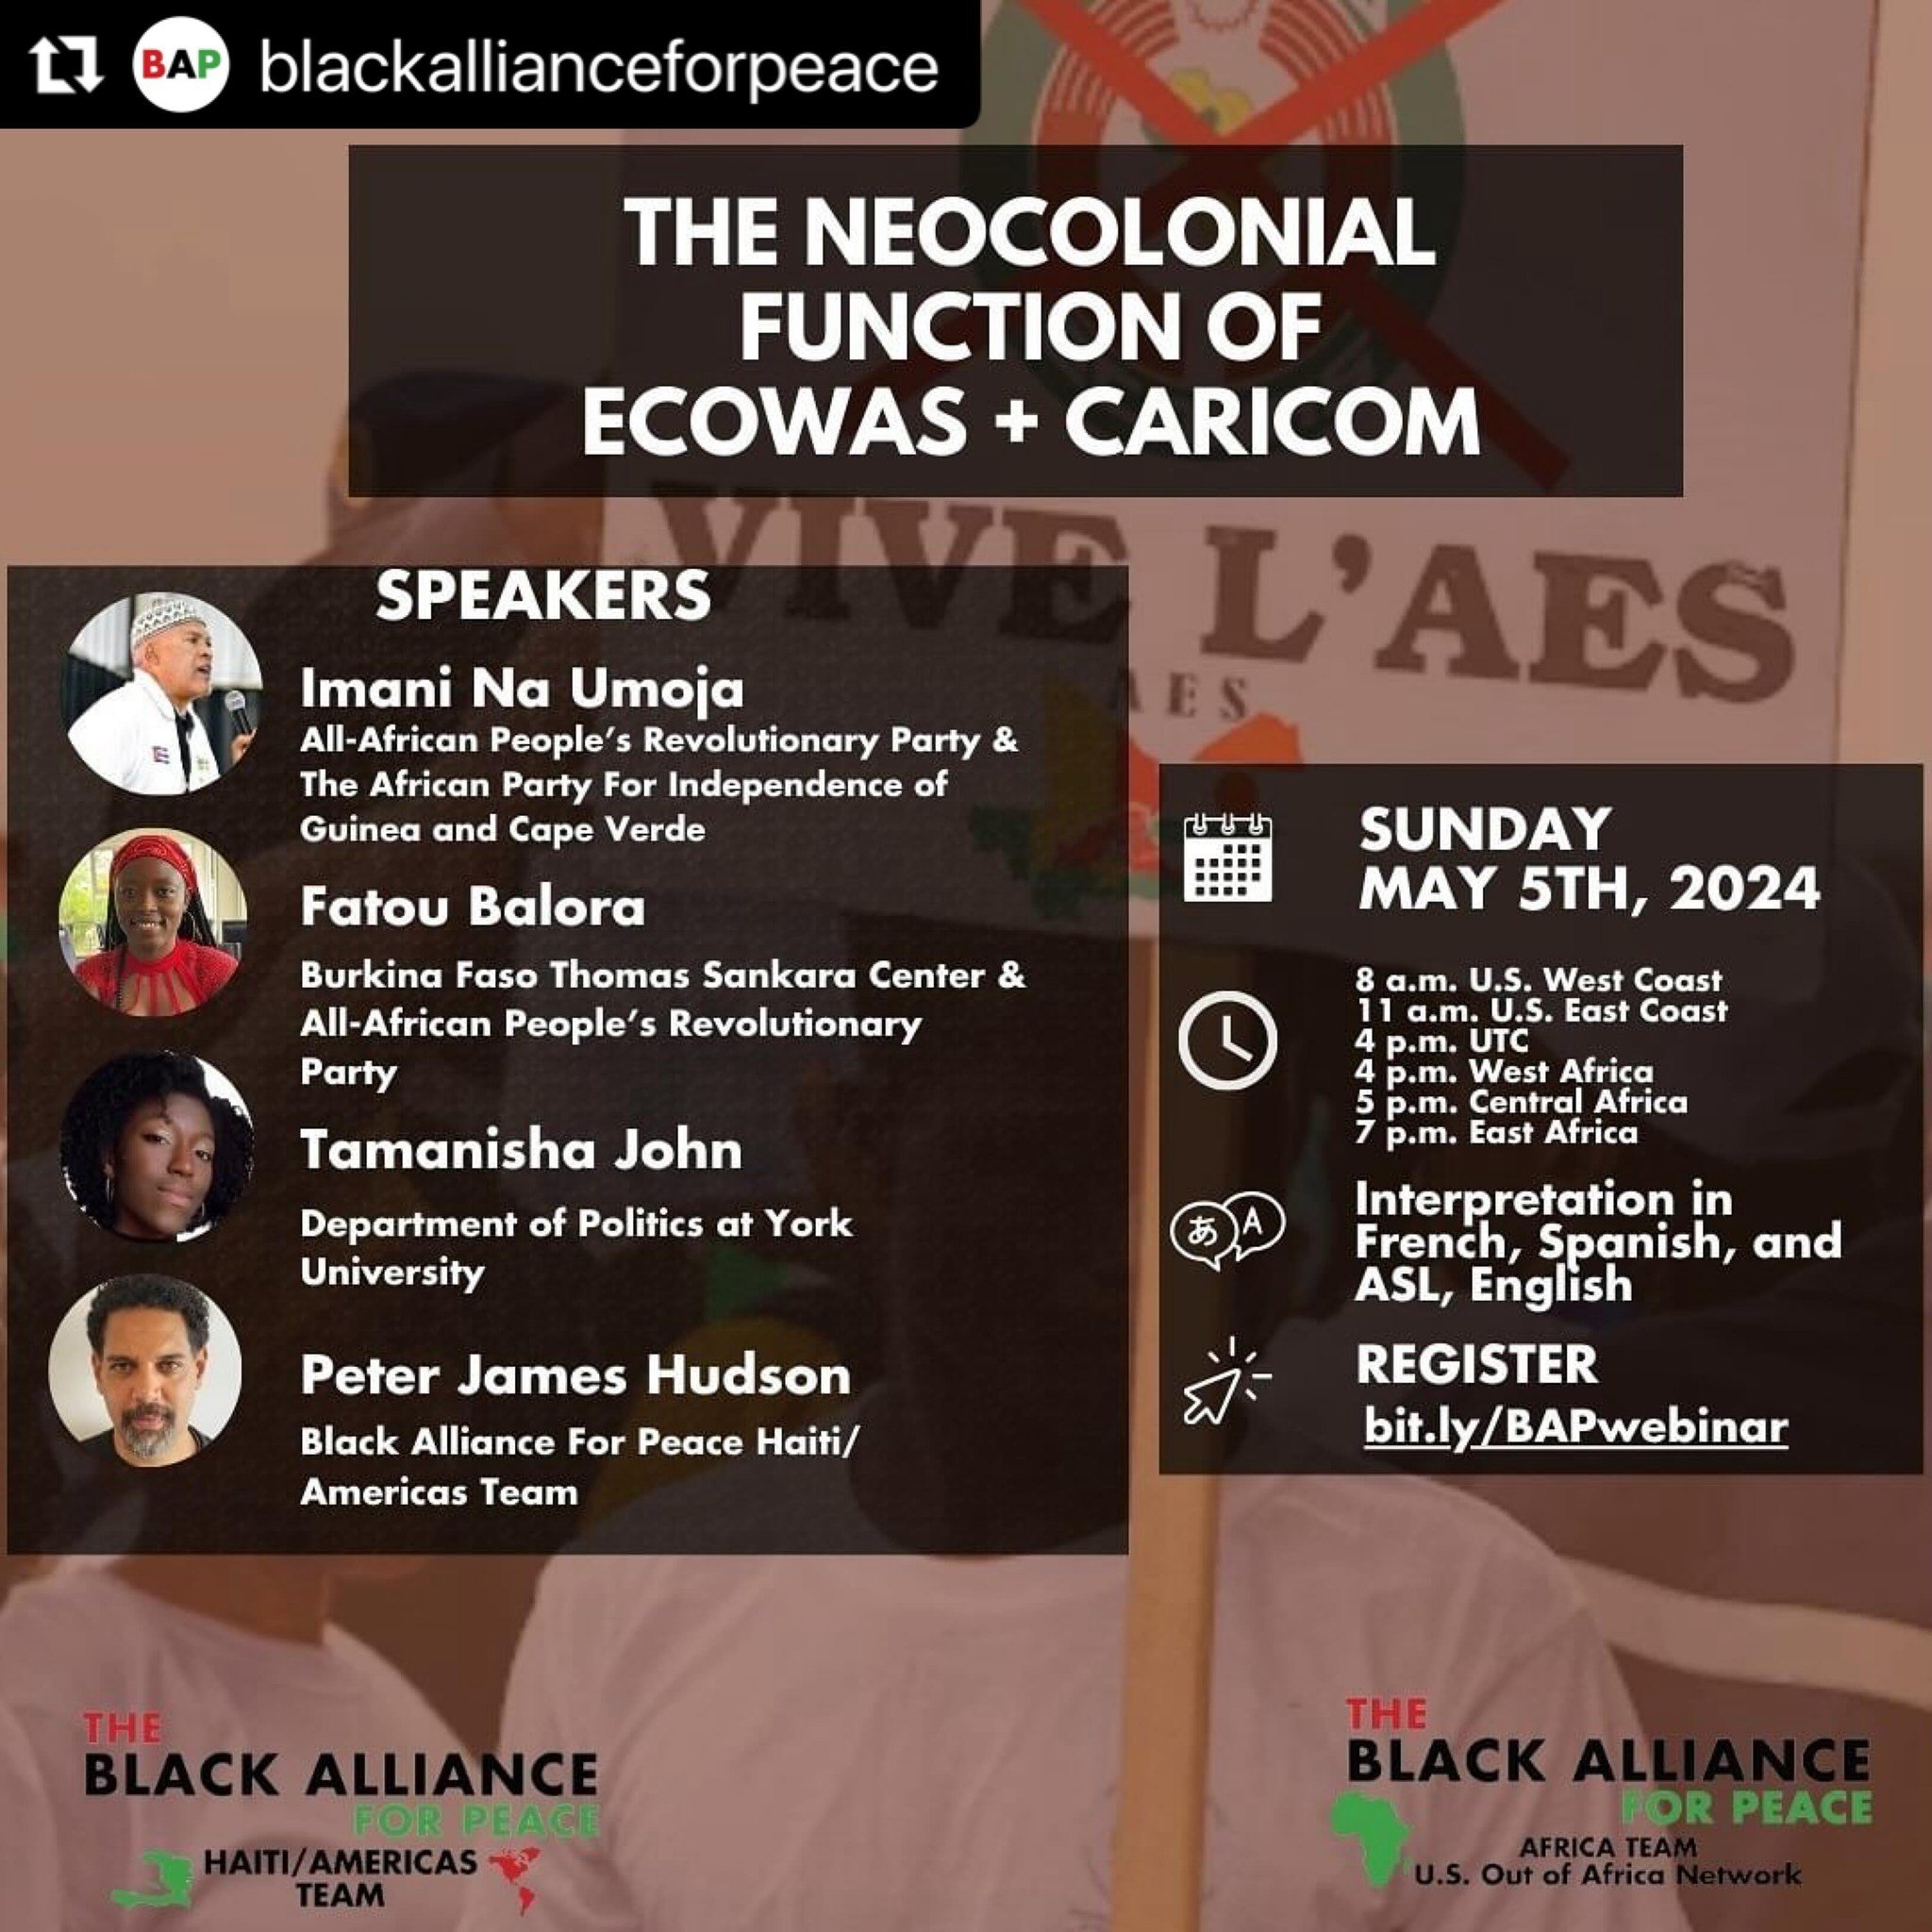 #Repost @blackallianceforpeace 
・・・
Join us in kicking off African Liberation Month at our upcoming webinar Sunday, May 5th where we will unpack the complex geopolitical landscapes of Africa and the Americas under CARICOM and ECOWAS, explore key conc